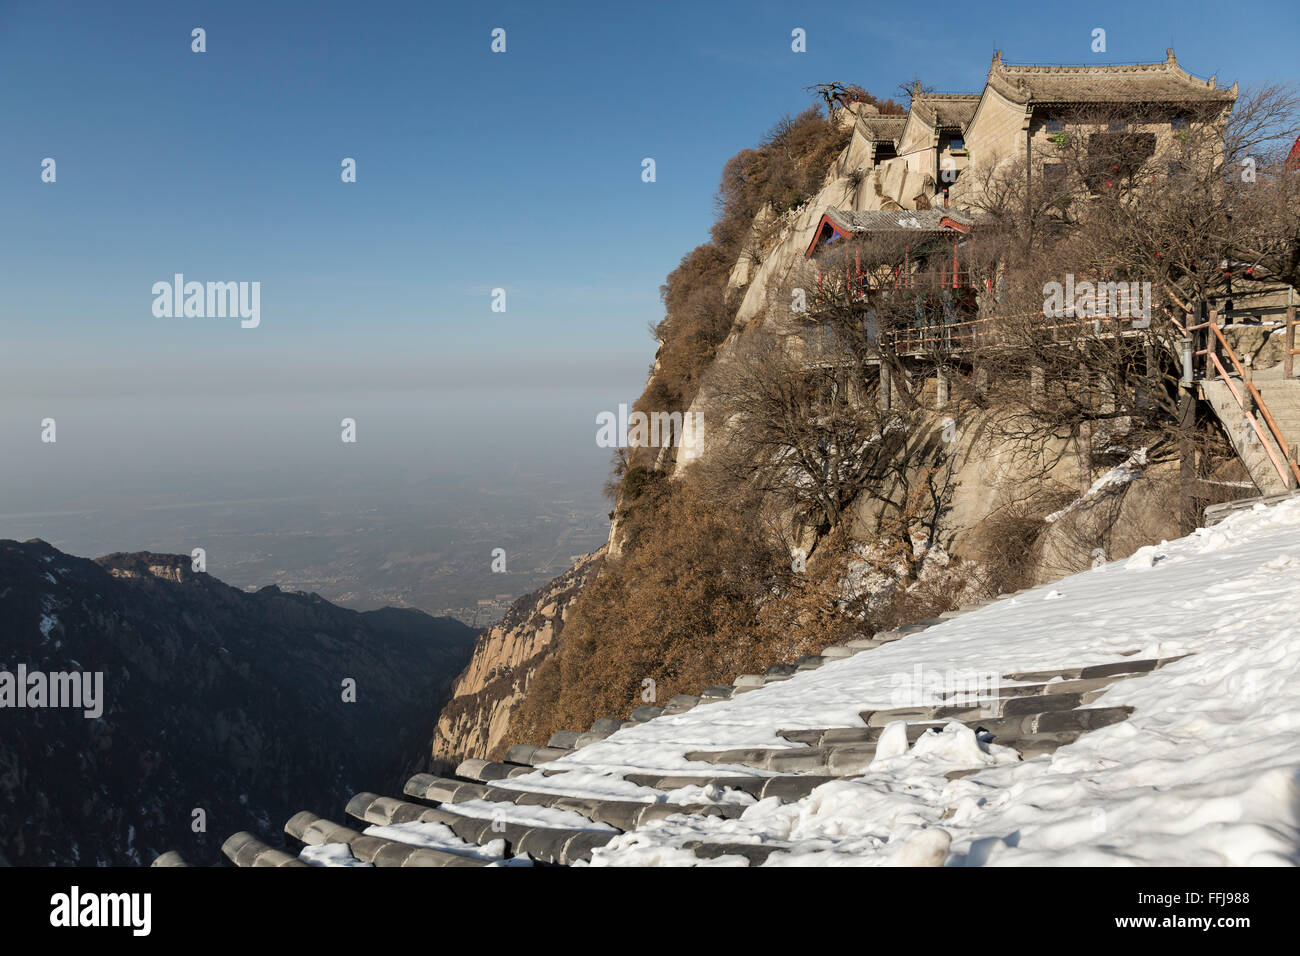 View of a temple on the North Peak of Mount Huashan, China Stock Photo